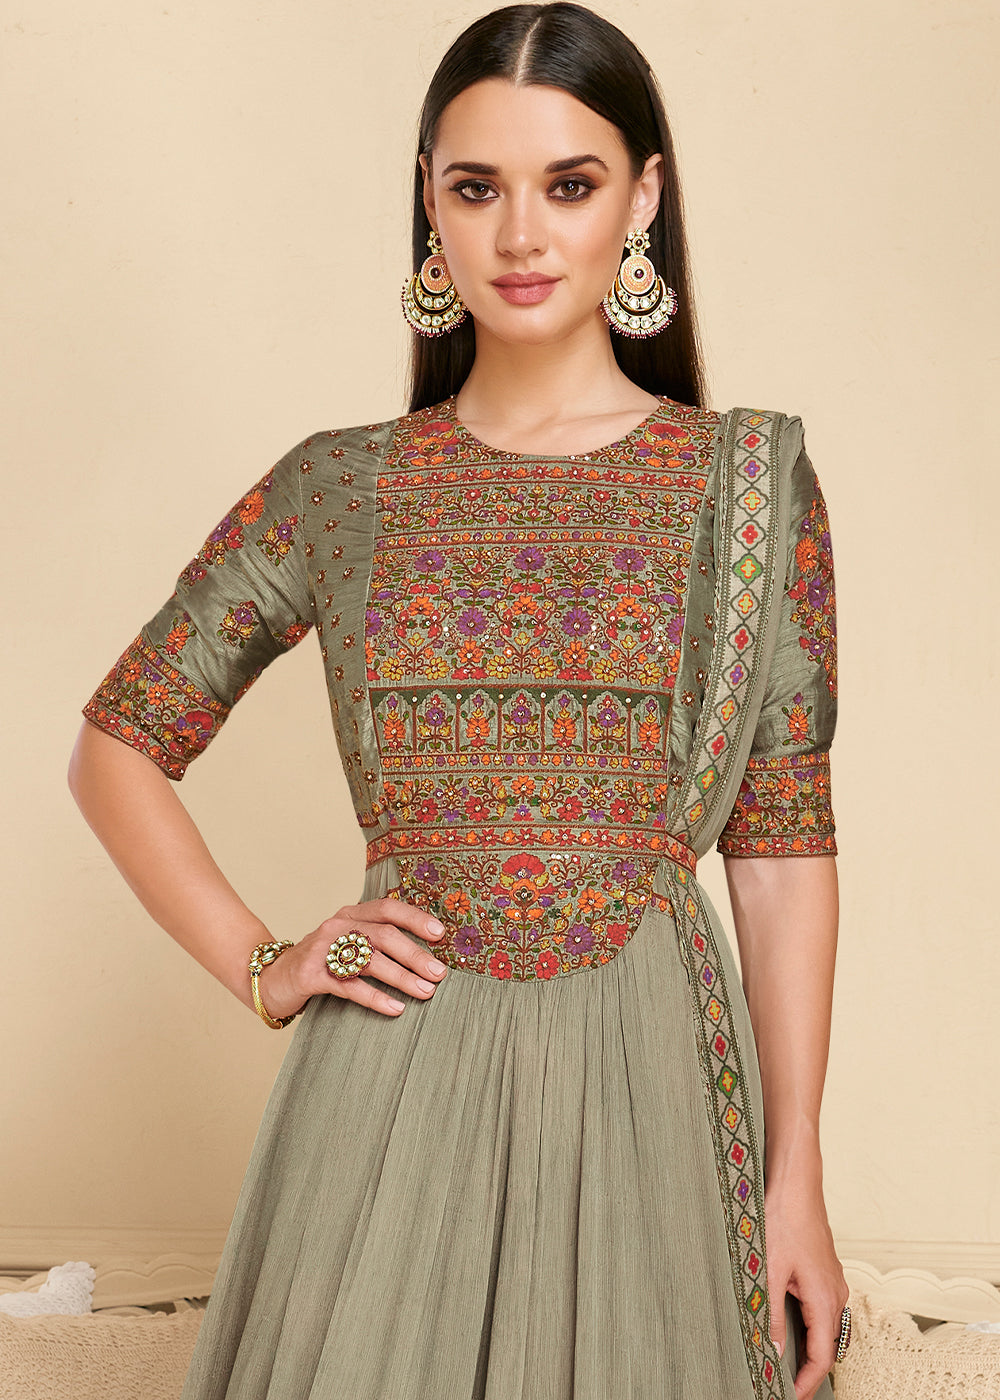 Shades Of Green Designer Georgette  Anarkali Suit with Embroidery work By Qivii